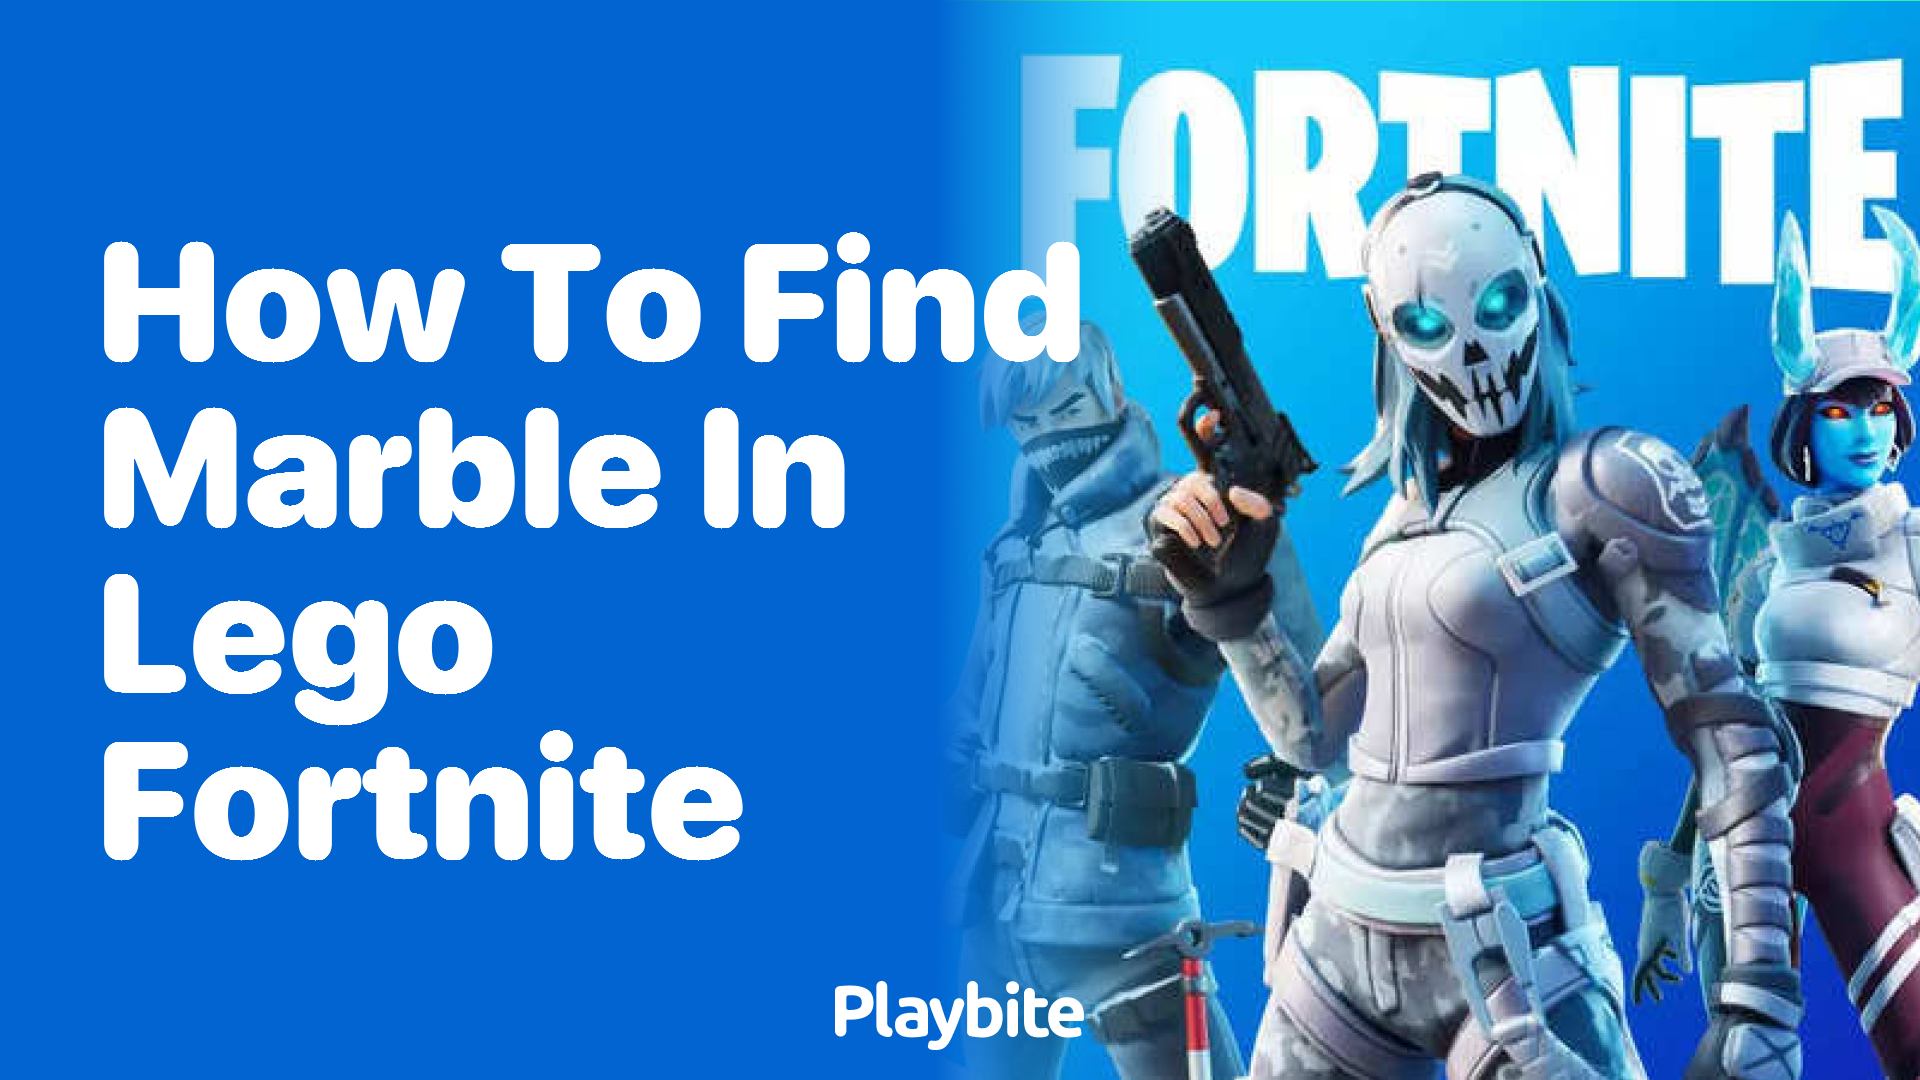 How to Find Marble in Lego Fortnite?